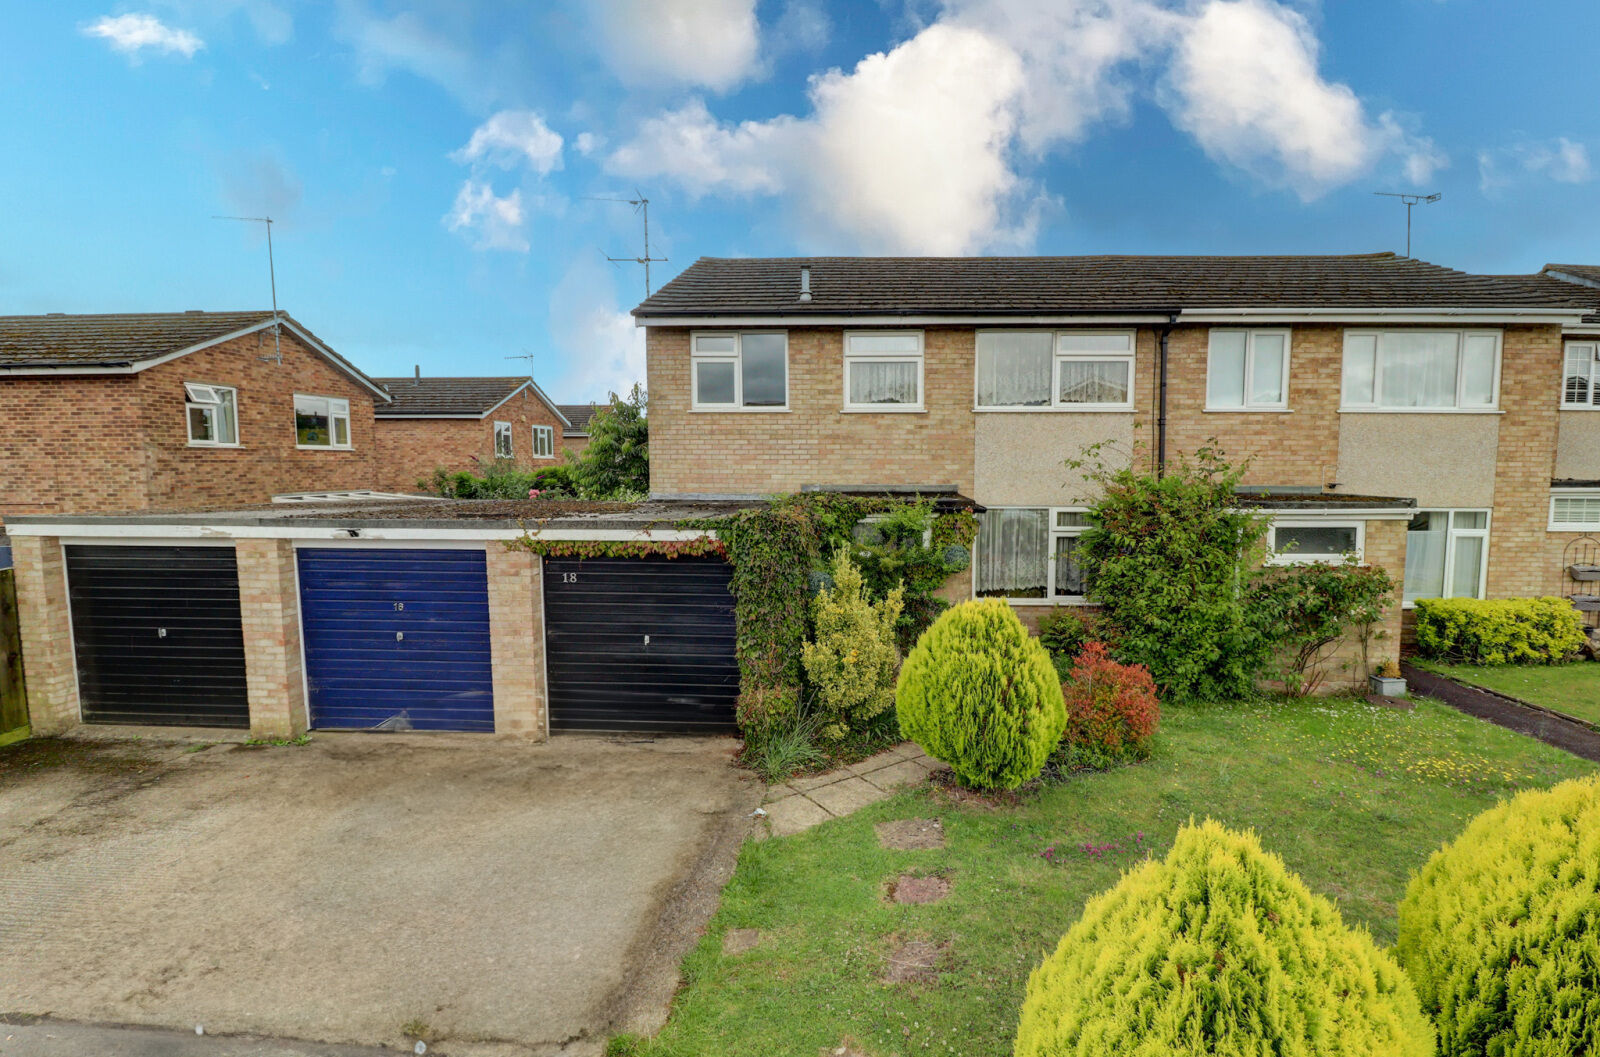 4 bedroom end terraced house for sale Elder Way, High Wycombe, HP15, main image